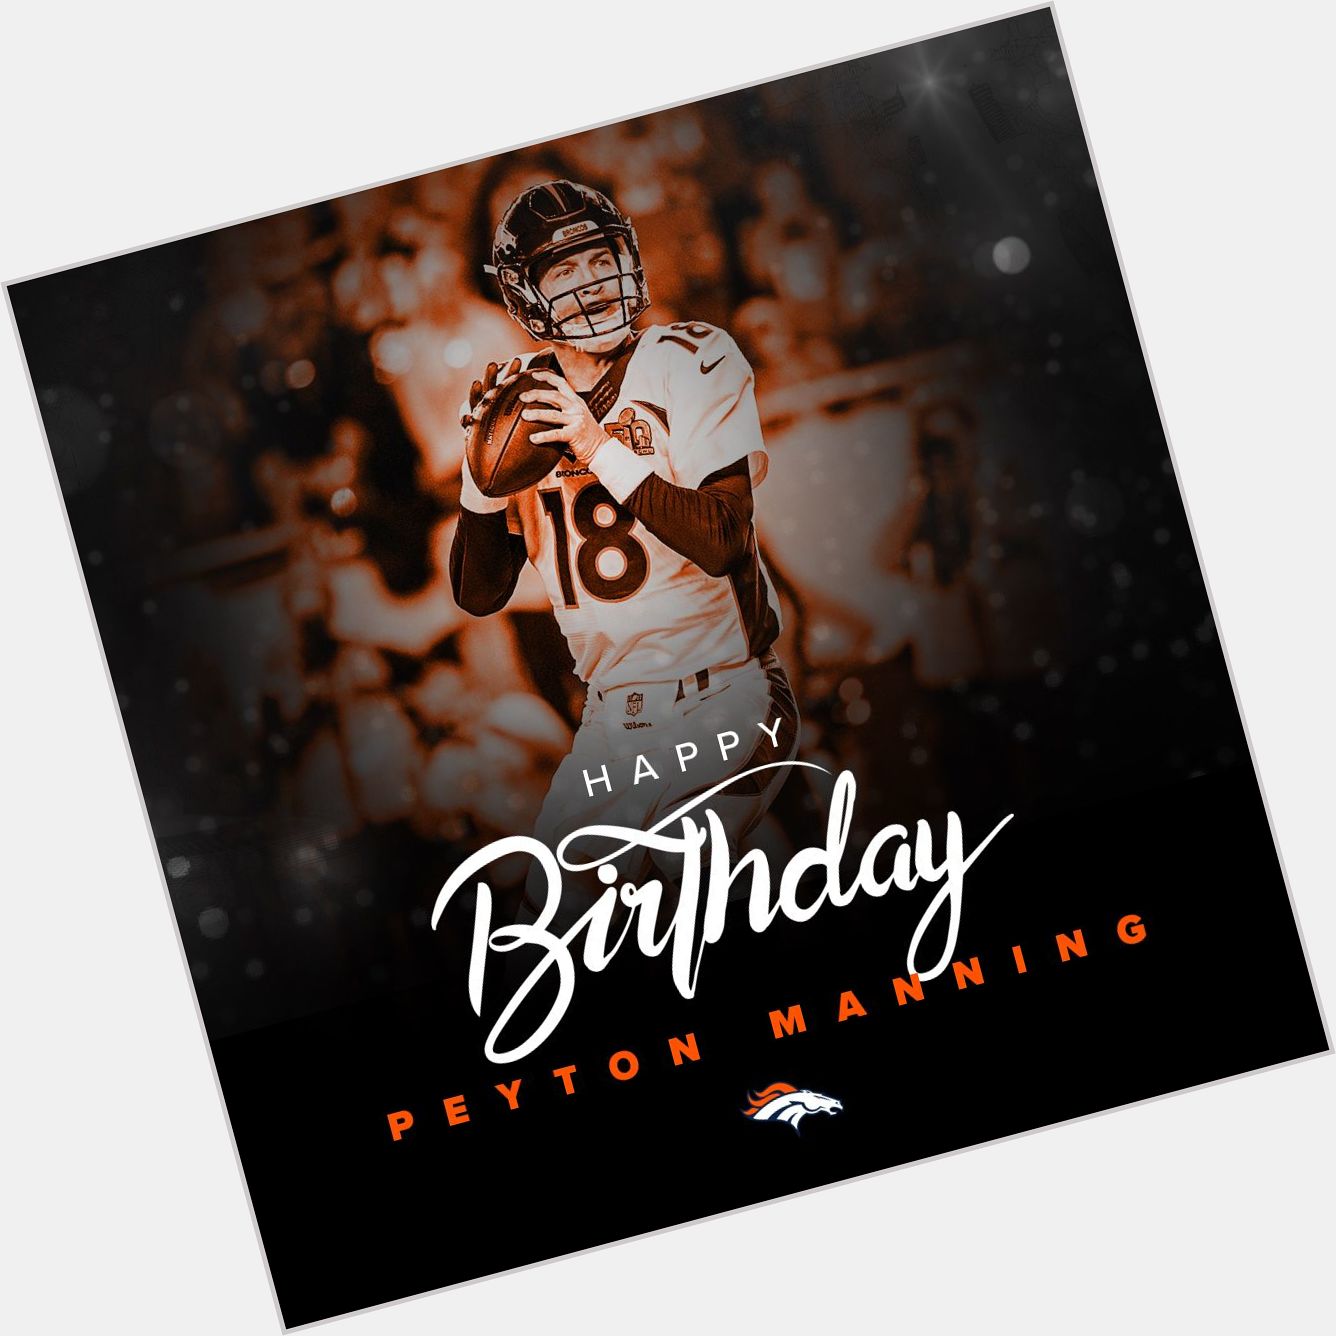 Here s to you, 18. 

Happy birthday, Peyton Manning! 